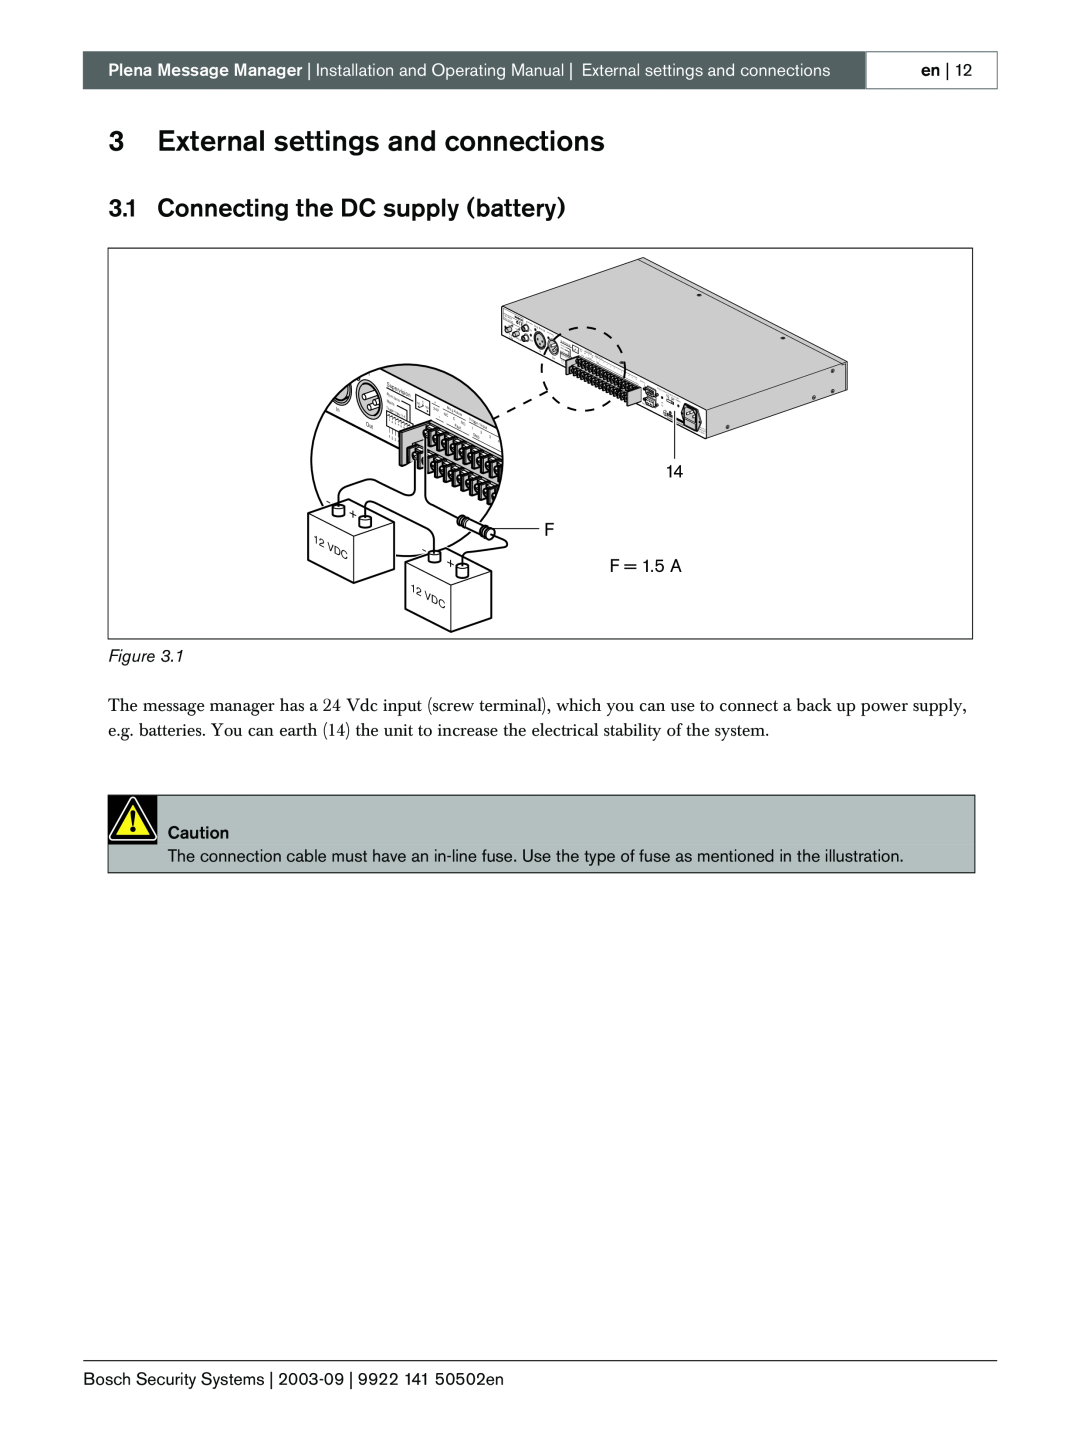 Bosch Appliances LBB 1965 manual 3External settings and connections, Connecting the DC supply battery, en, F = 1.5 A 